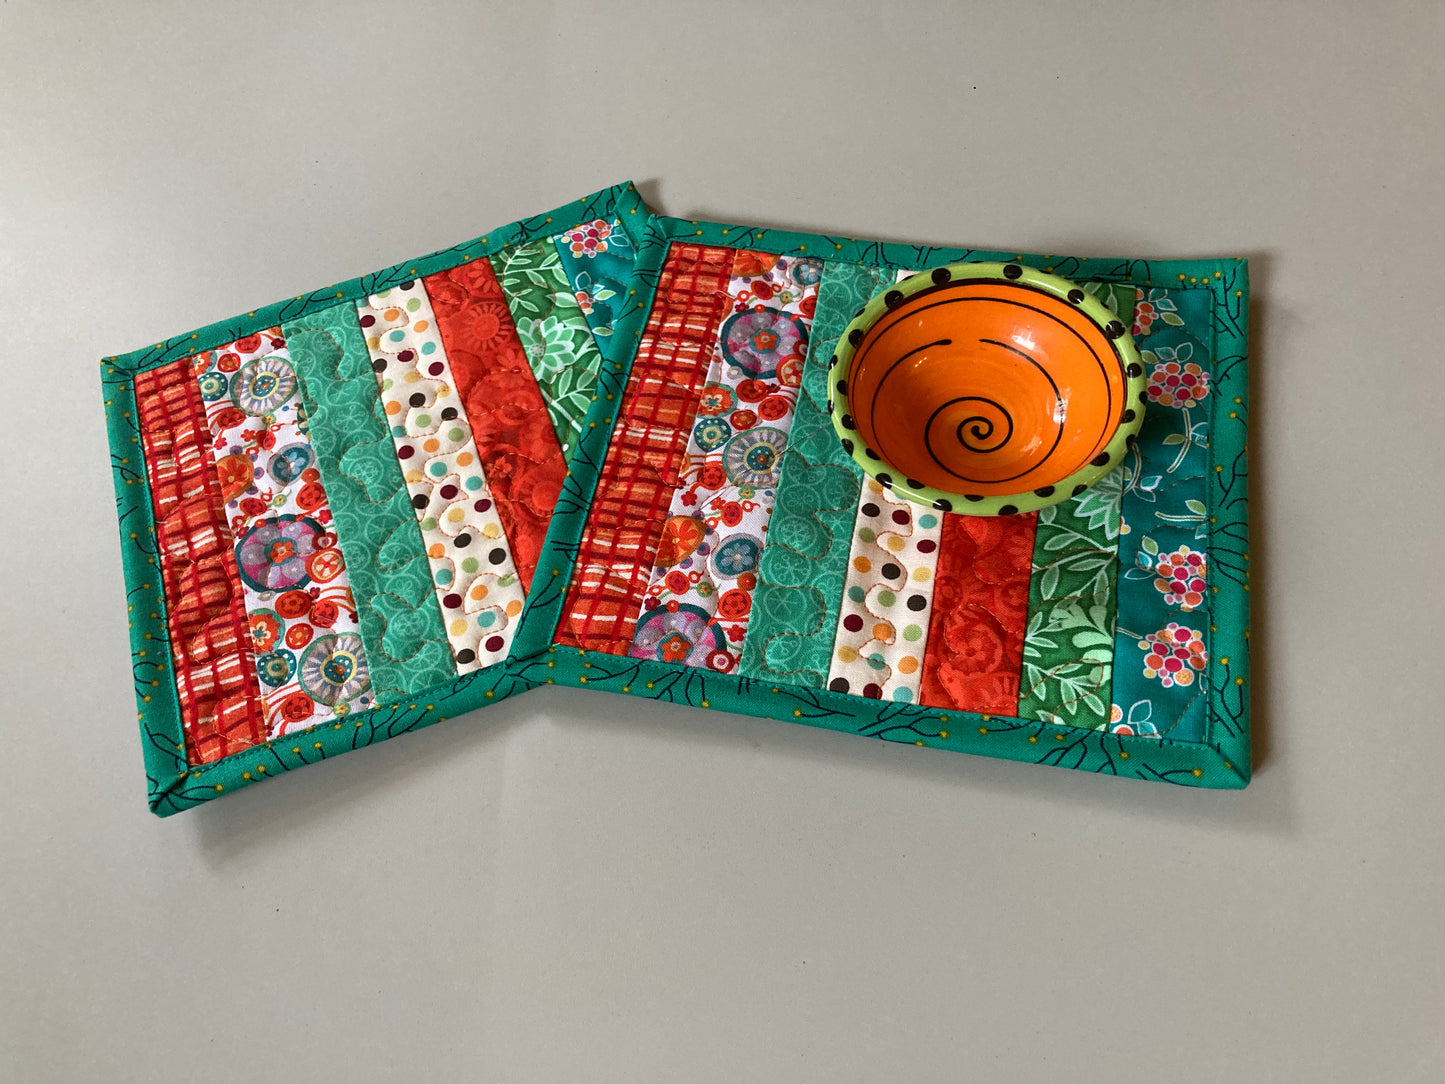 Bright Orange Turquoise Summer Mug Rug Snack Mat Set of (2) Coffee End Table, Large Coasters 7x8", Quilted Boho Scrappy Bright Handmade